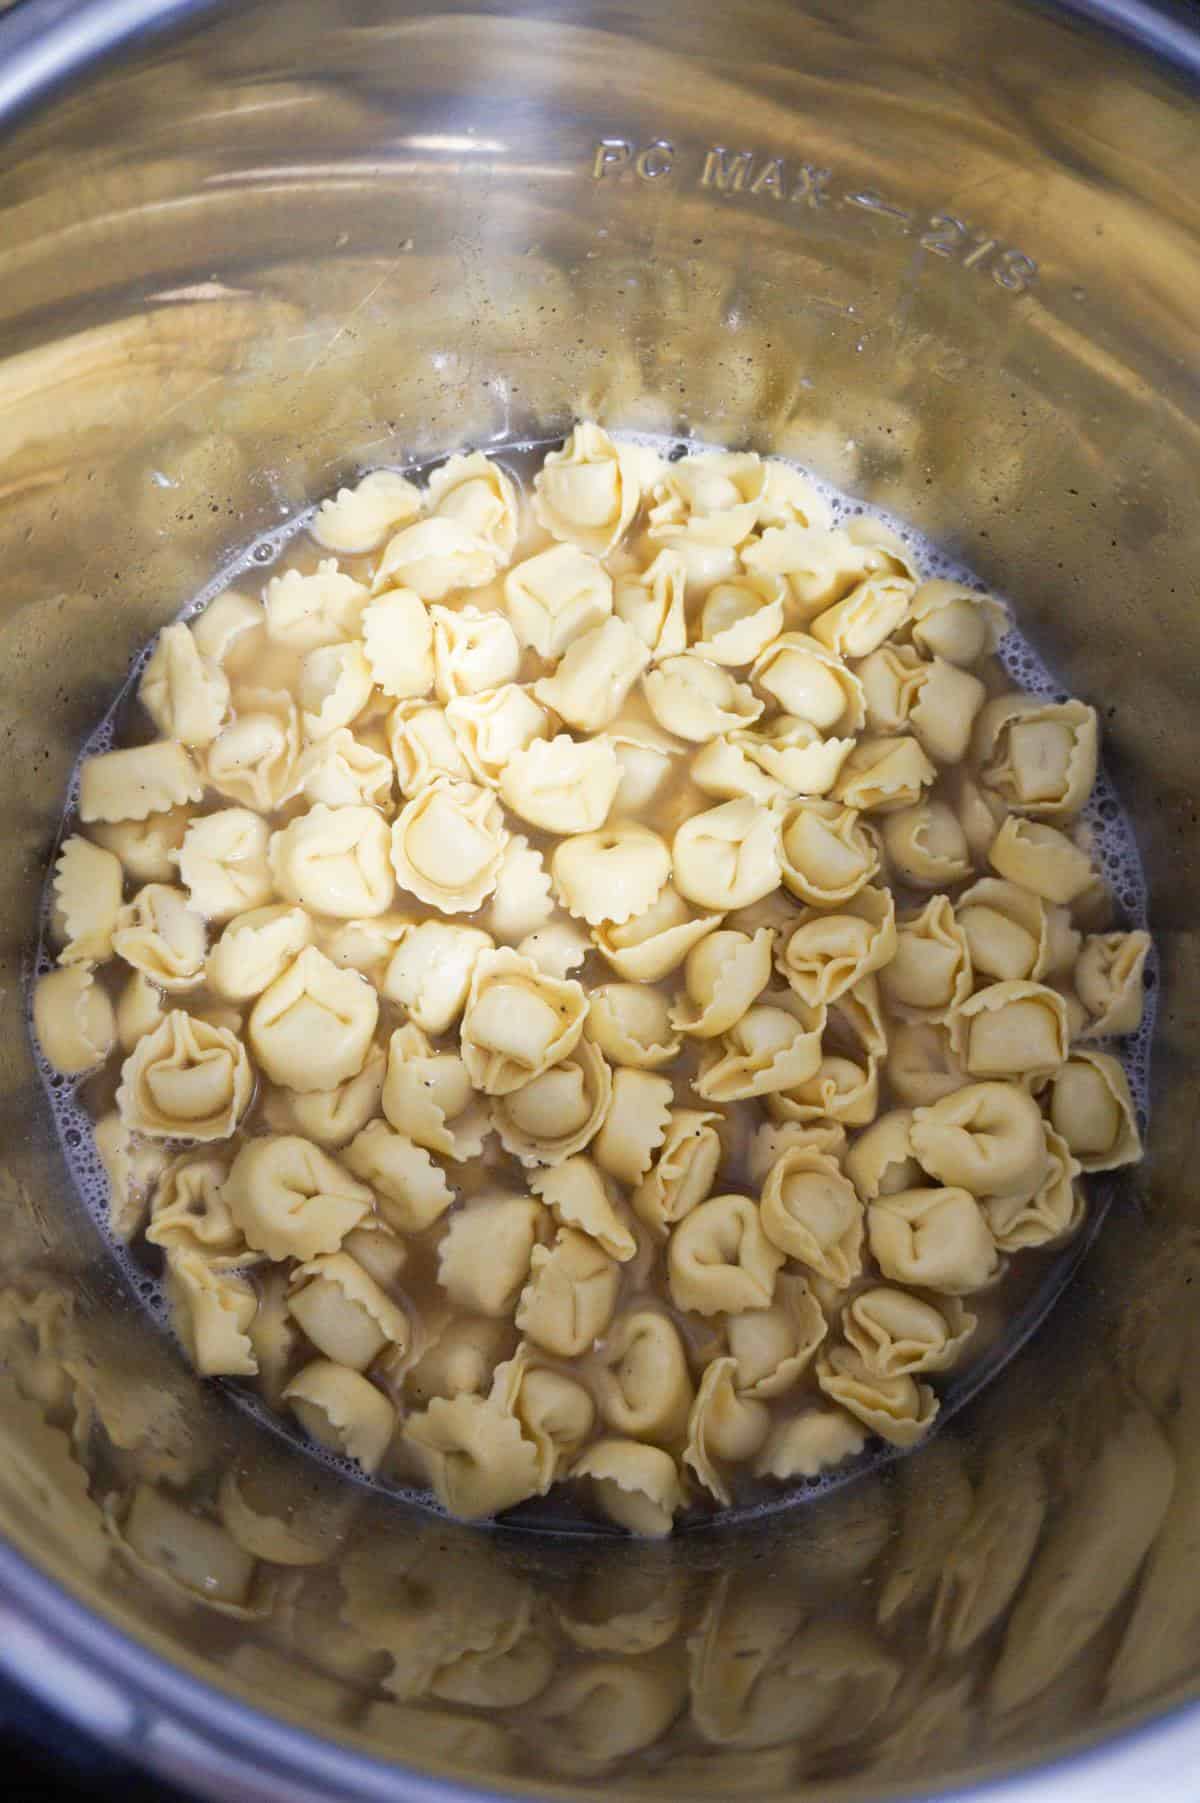 uncooked tortellini in an Instant Pot